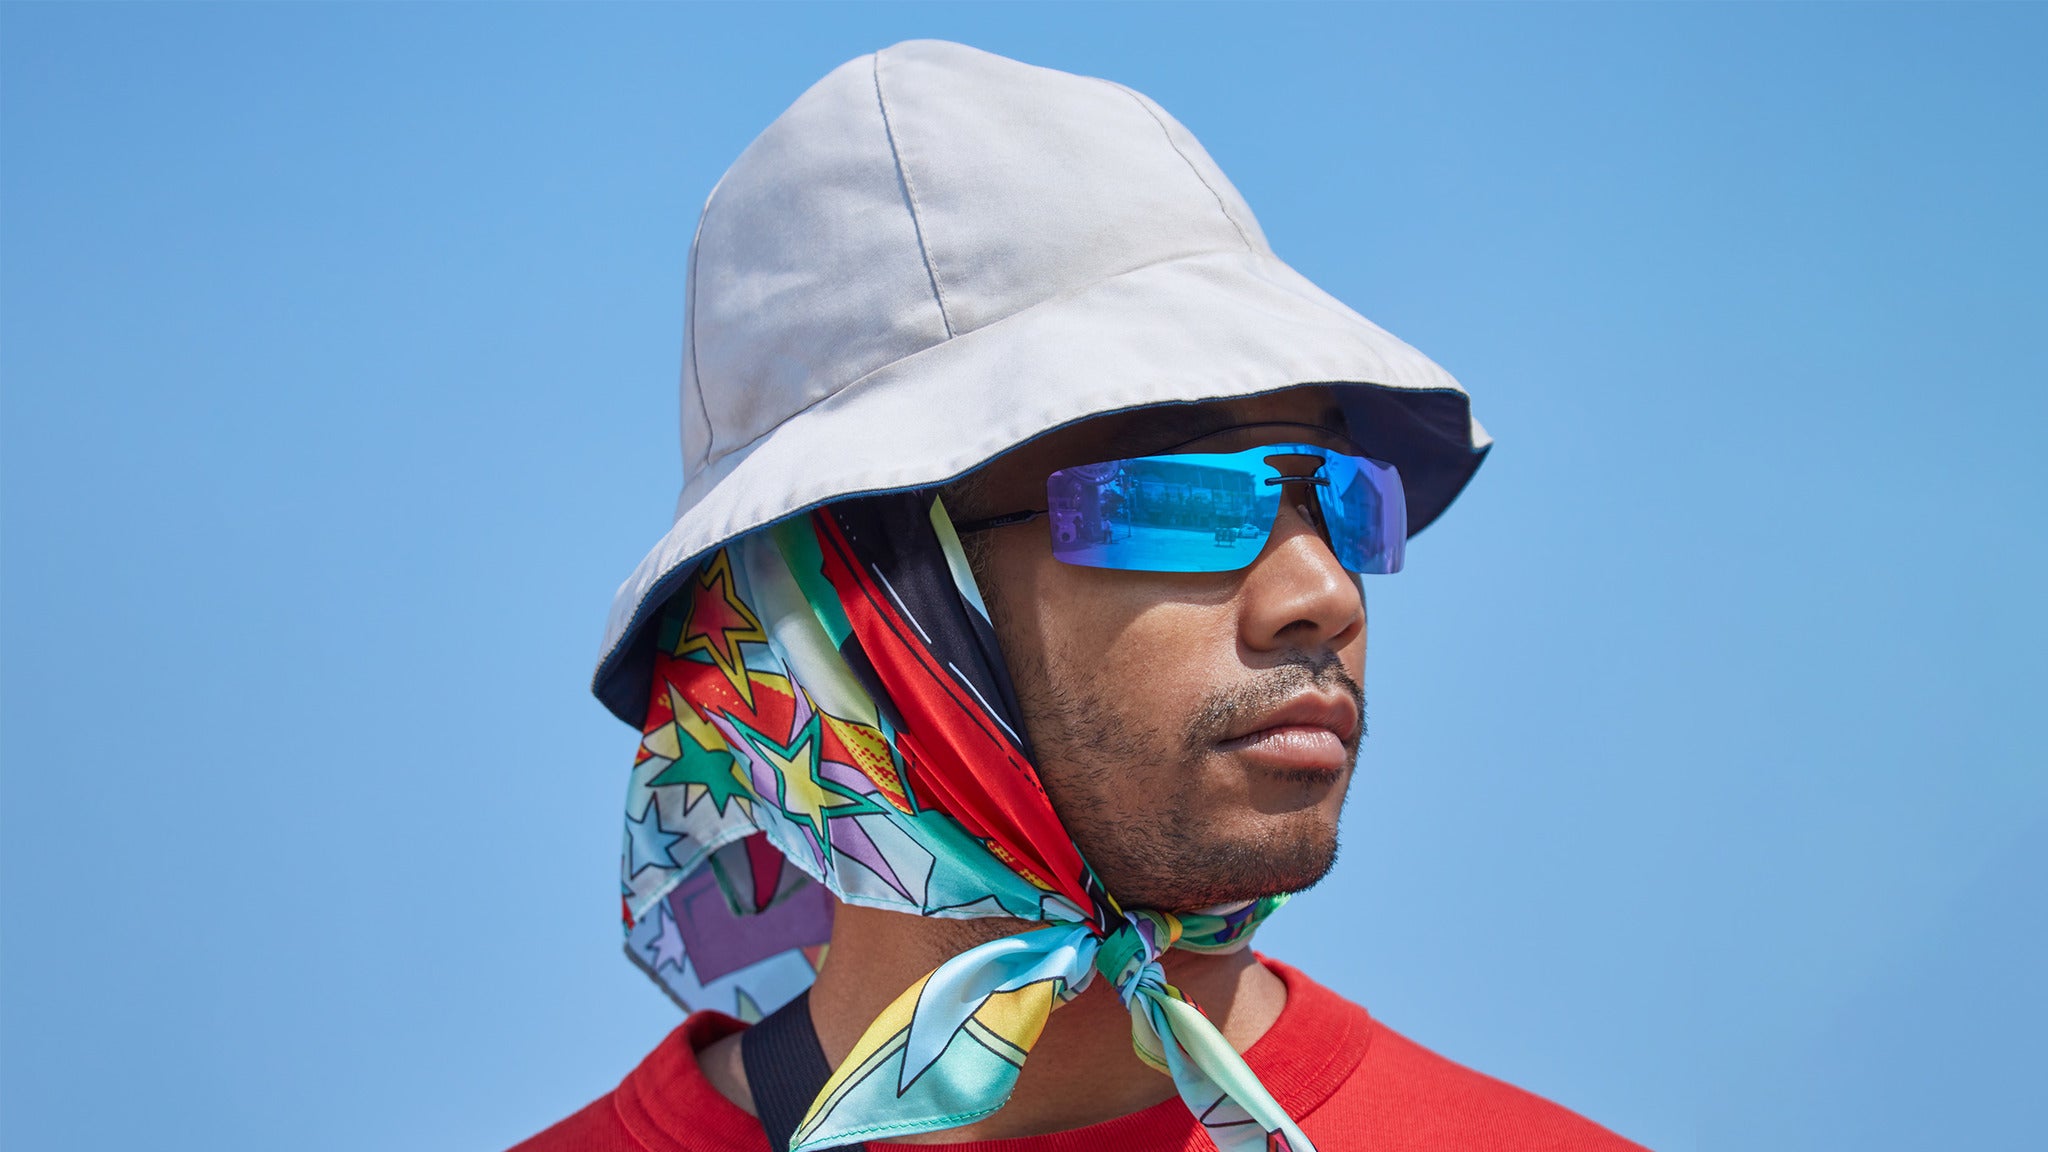 Toro y Moi in Hollywood promo photo for Live Nation presale offer code